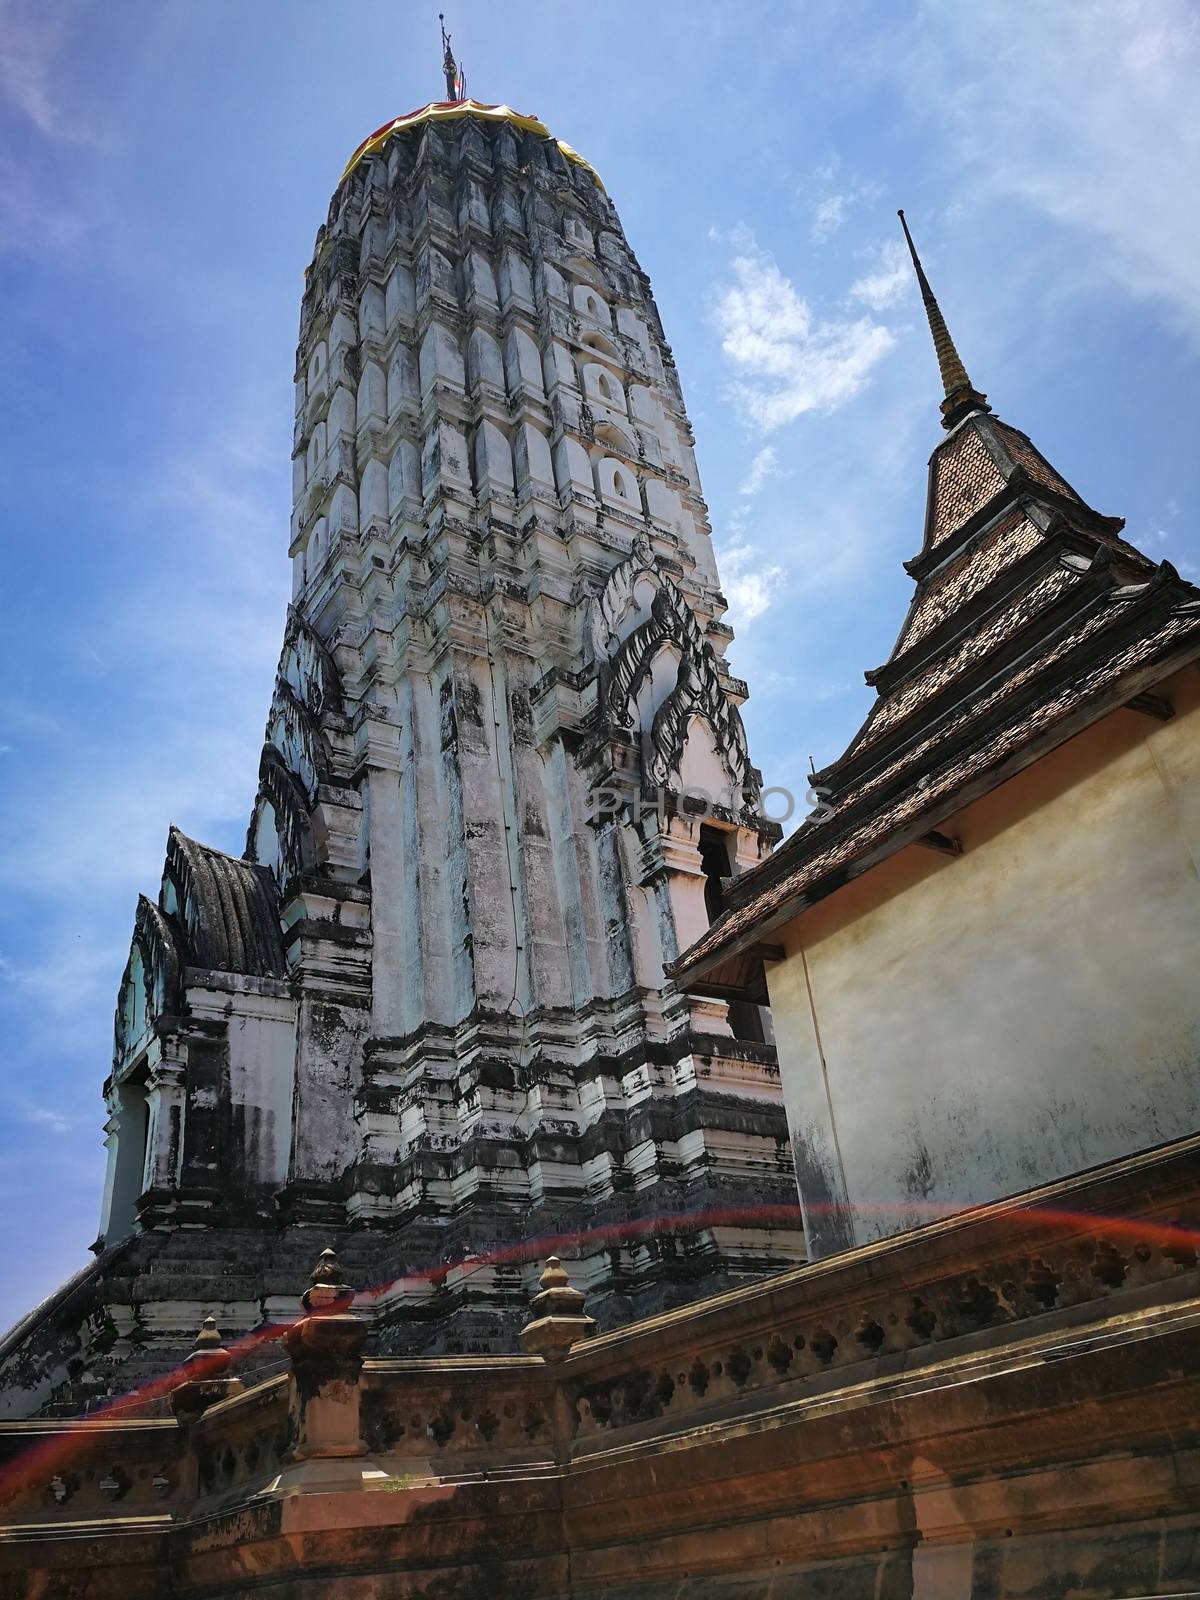 A beautiful Thailand temples, pagodas and Buddha statute in old historical's Thailand country at "Ayutthaya" Province Thailand.